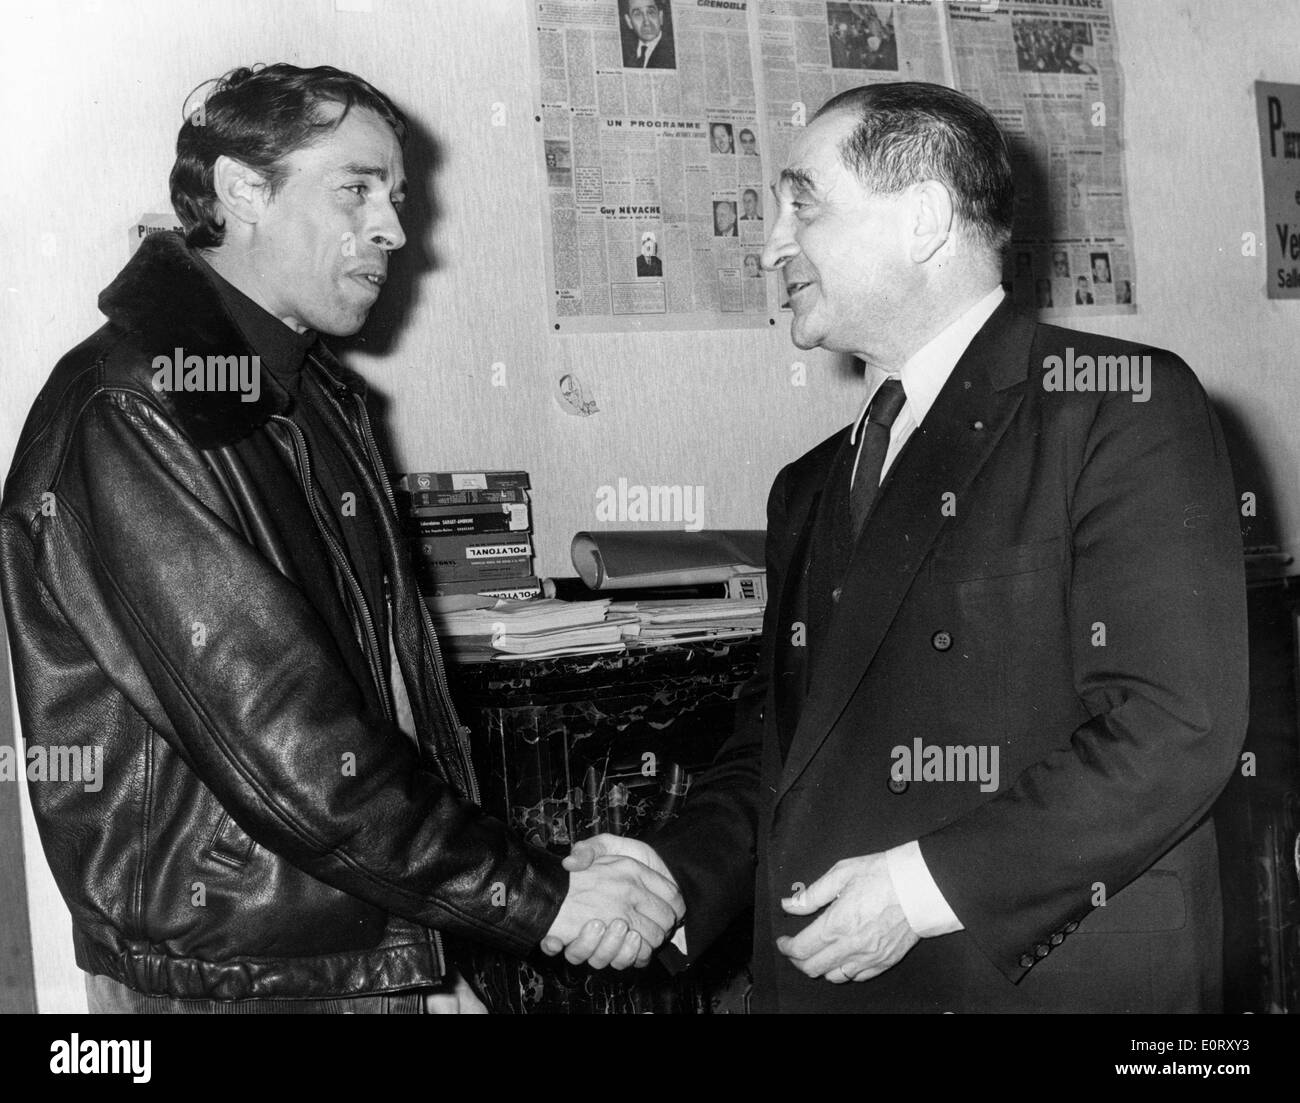 French politician PIERRE MENDES-FRANCE, right, shakes hands with a man. Stock Photo